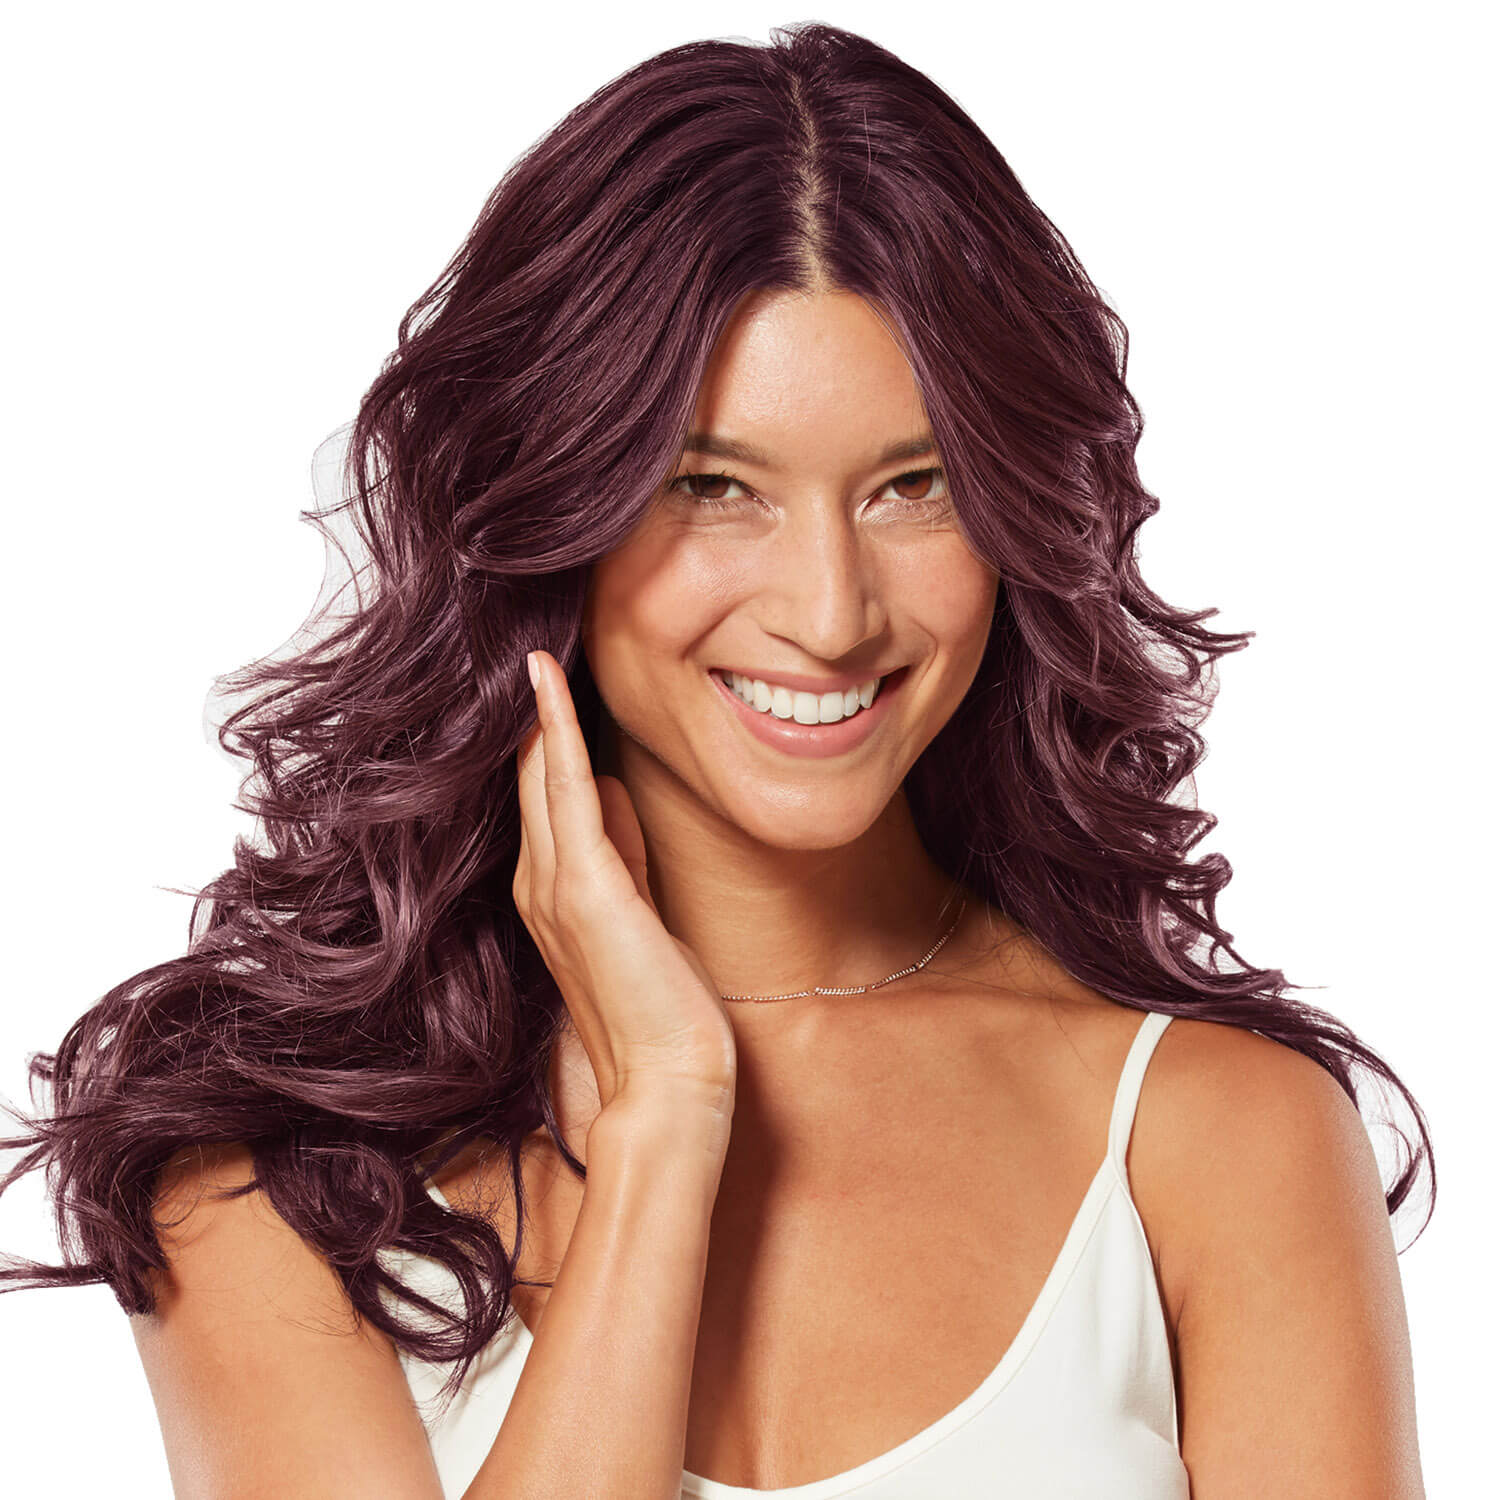 Salon-quality At Home Hair Color - Goodness Made Gorgeous | Better Natured